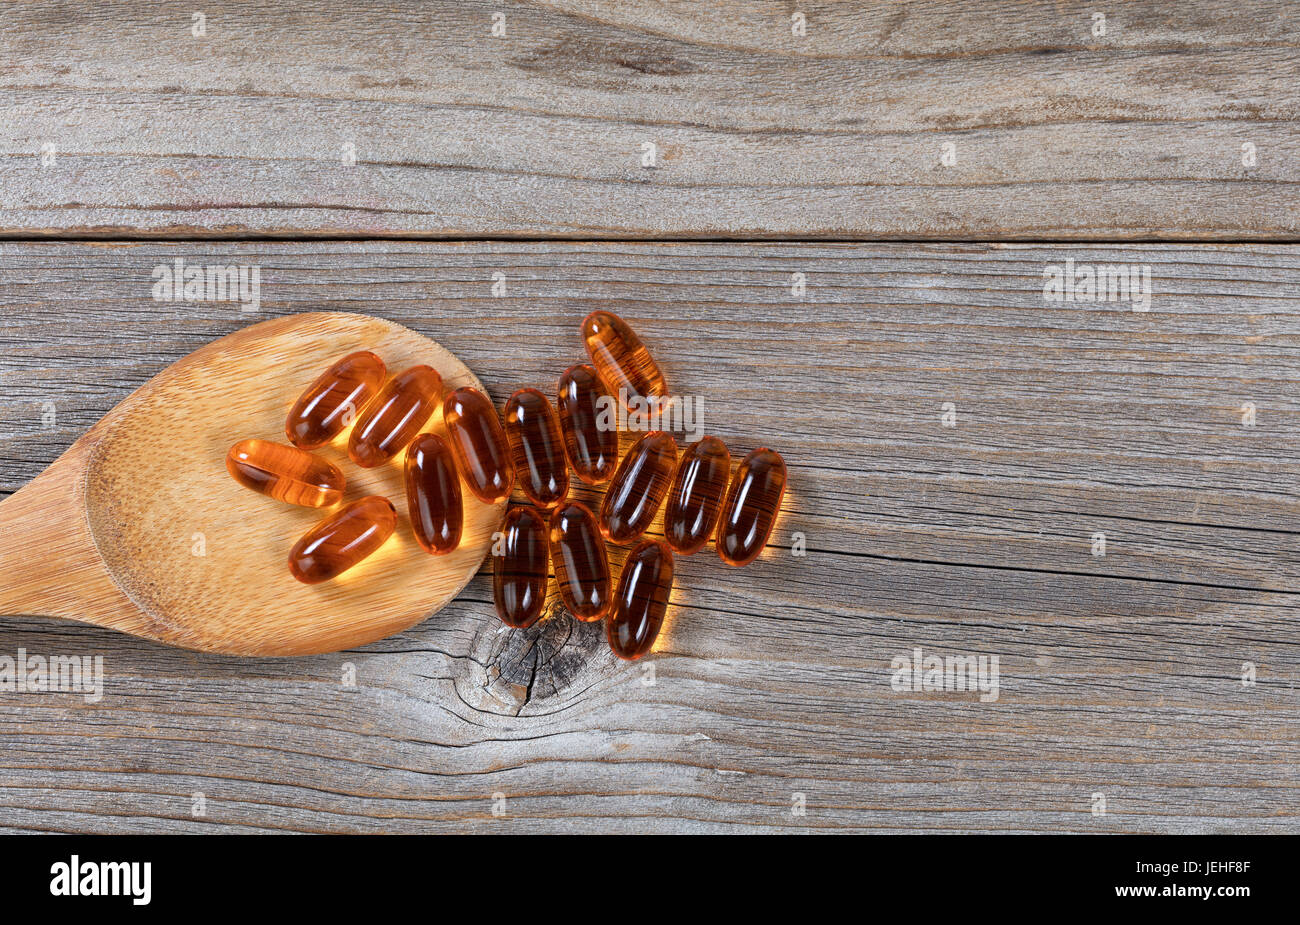 Pacific salmon fish oil capsules and wooden spoon on rustic wood. Flat lay view. Stock Photo